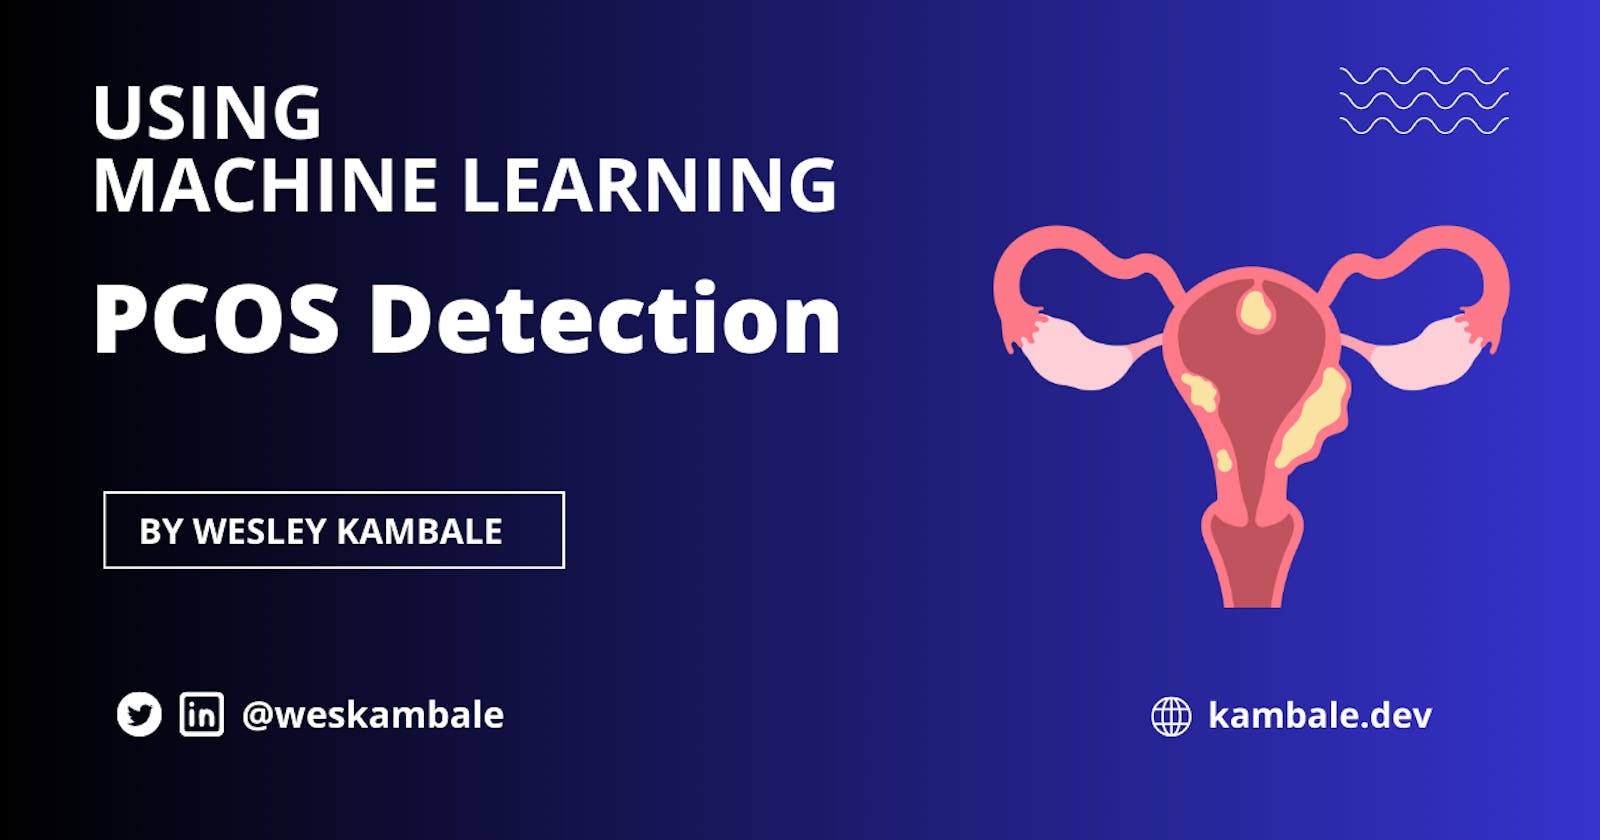 PCOS Detection Using Machine Learning